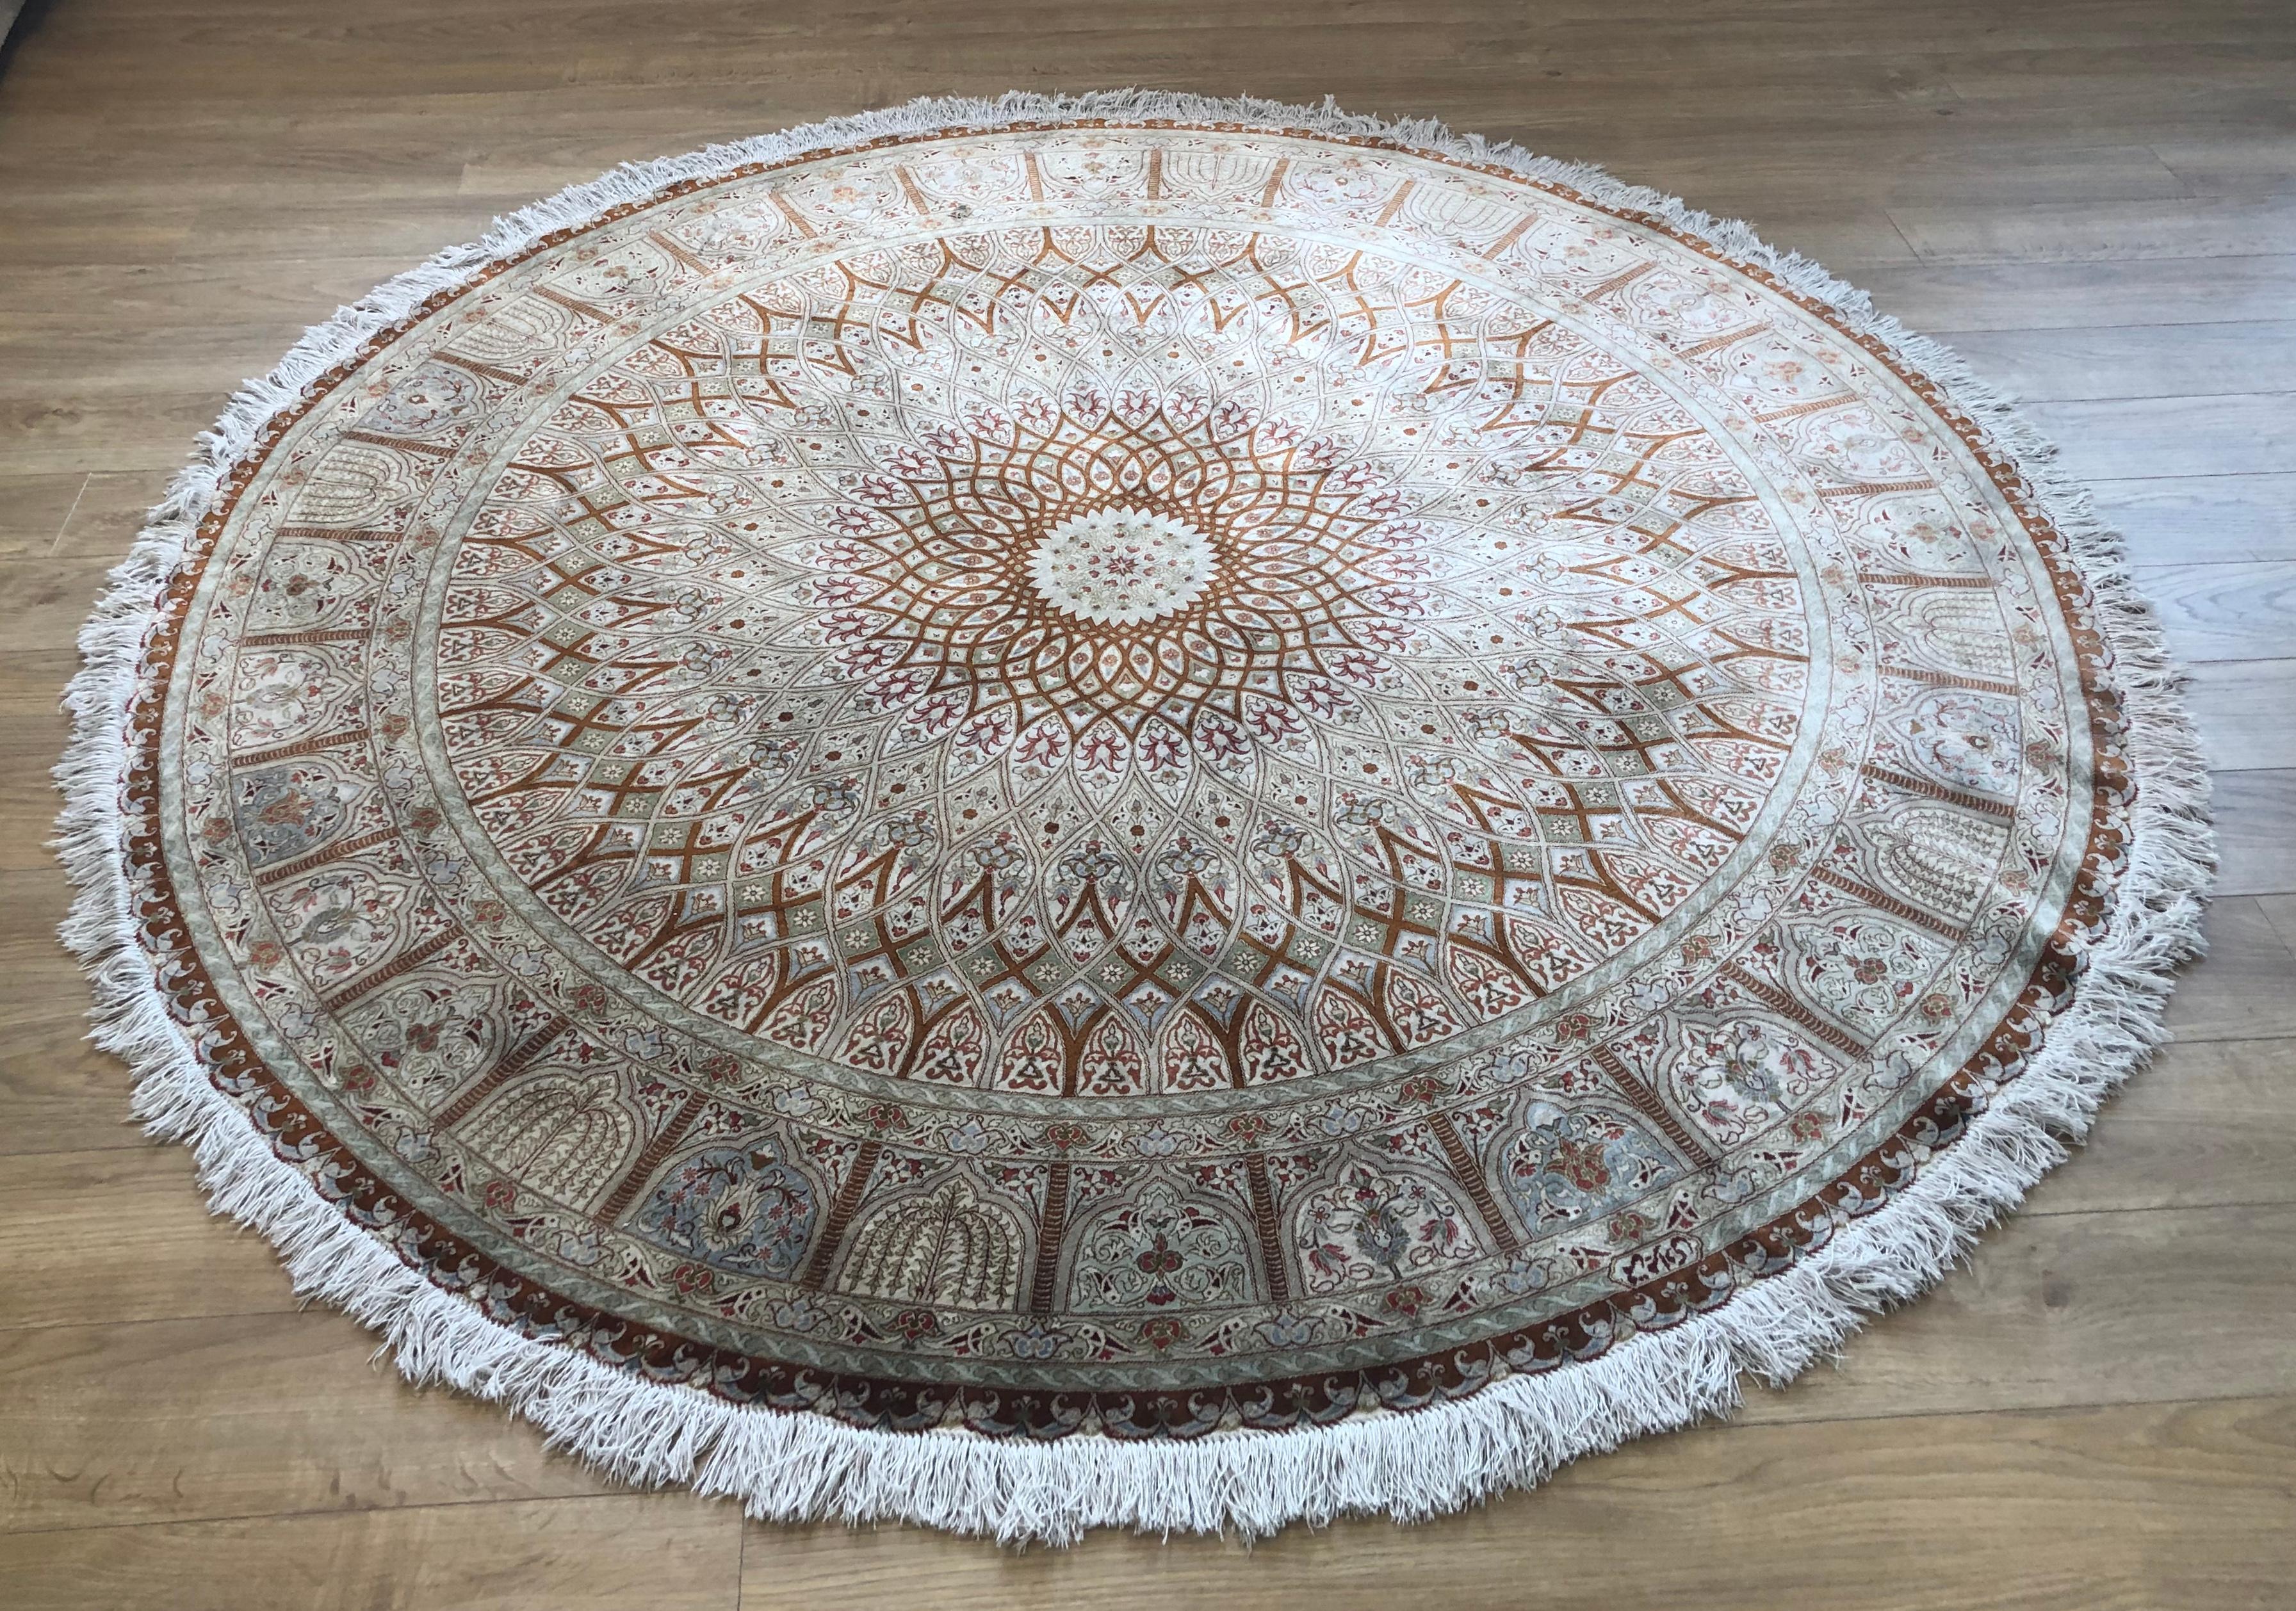 Very beautiful signed vintage Persian Qum Kazemi silk rug with floral decoration in light beige, brown and green colors in very good condition. Made of 1100000 knots per sq.m.